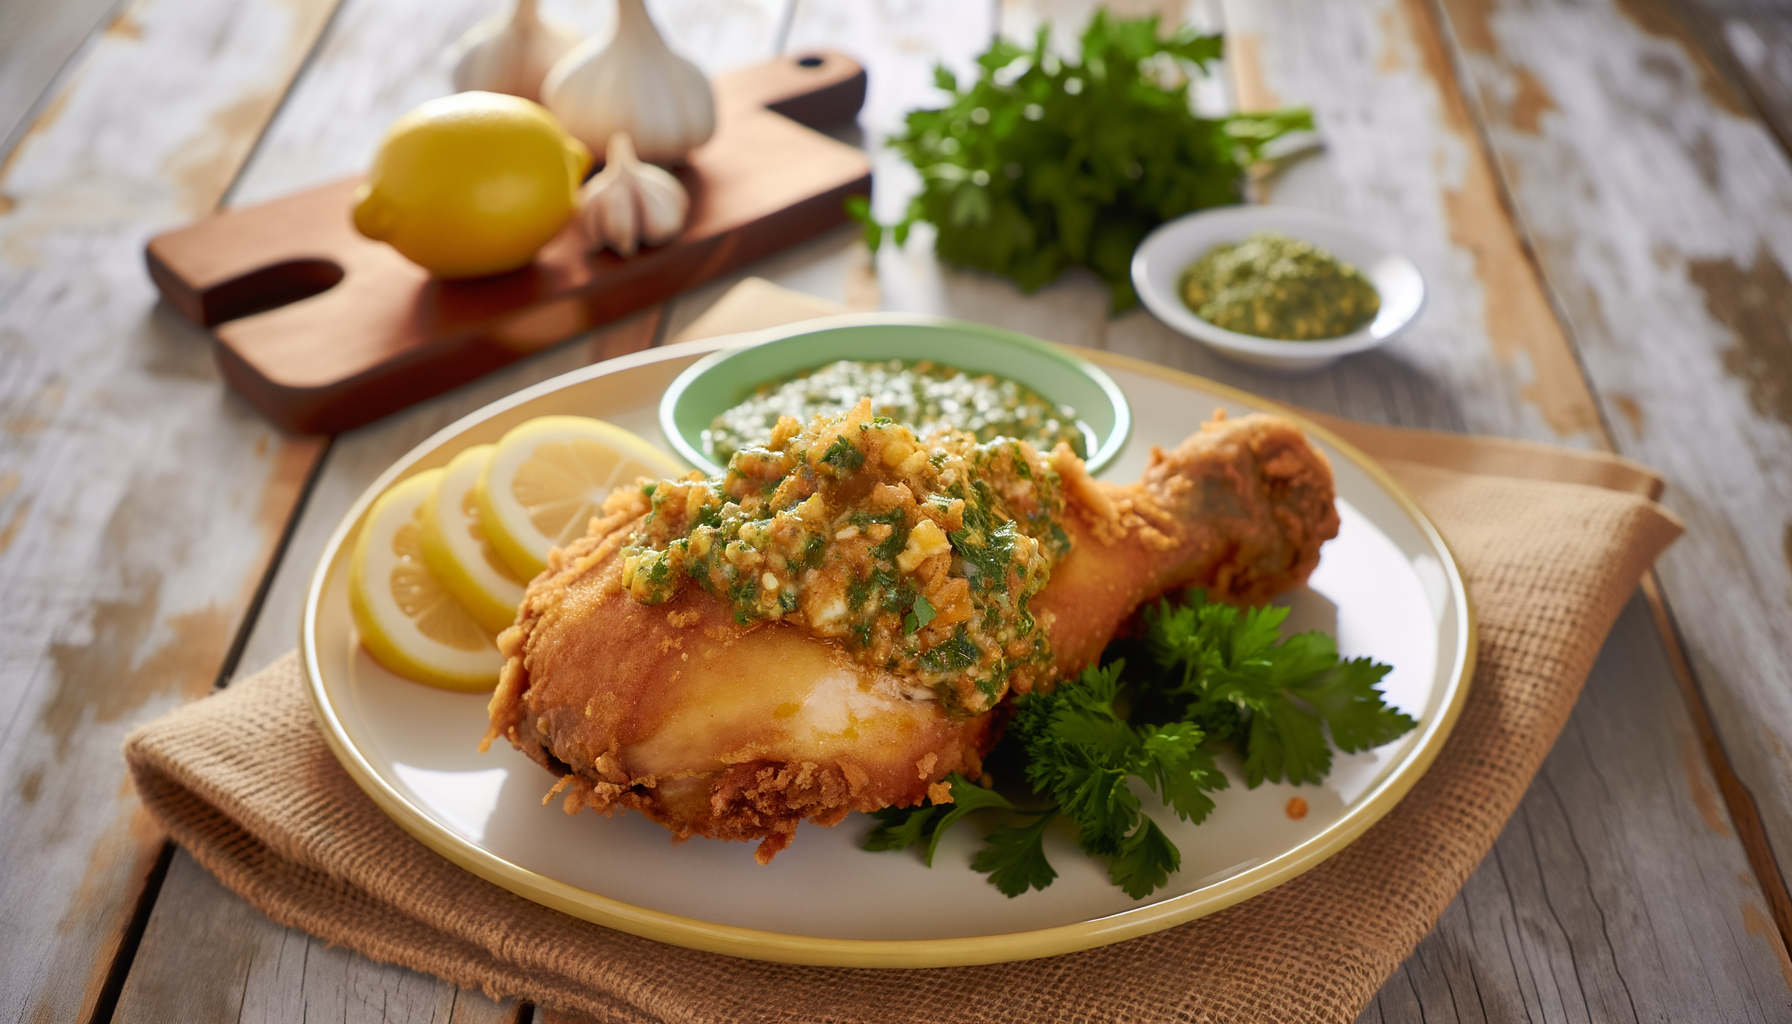 Crispy golden-brown garlic chicken topped with fresh herbs, garnished with lemon wedges and parsley on a wooden table.